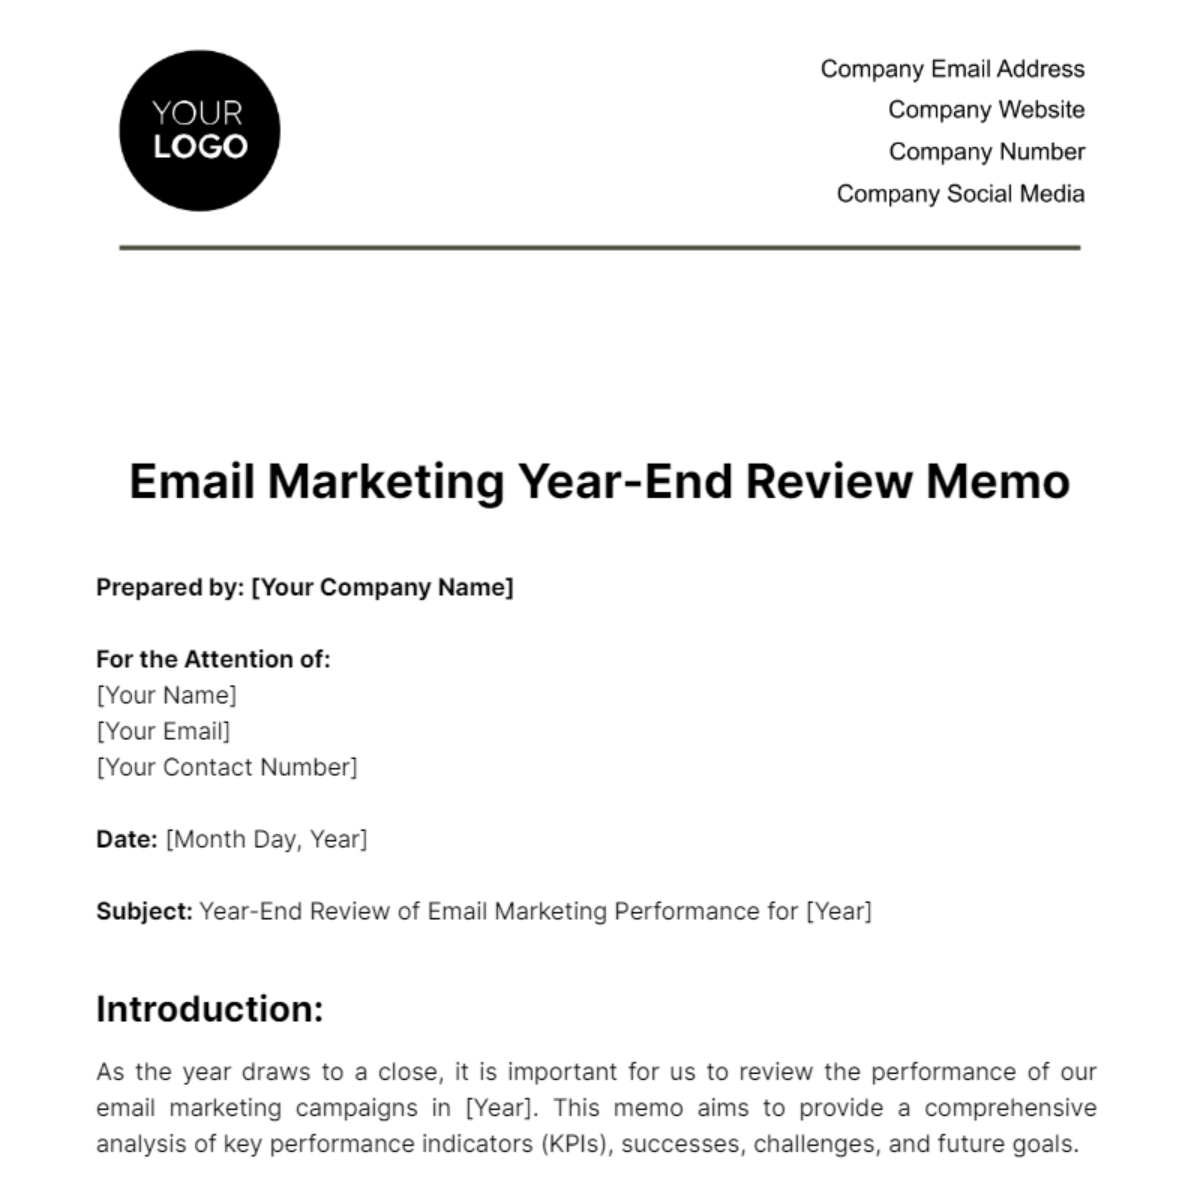 Free Email Marketing Year-End Review Memo Template